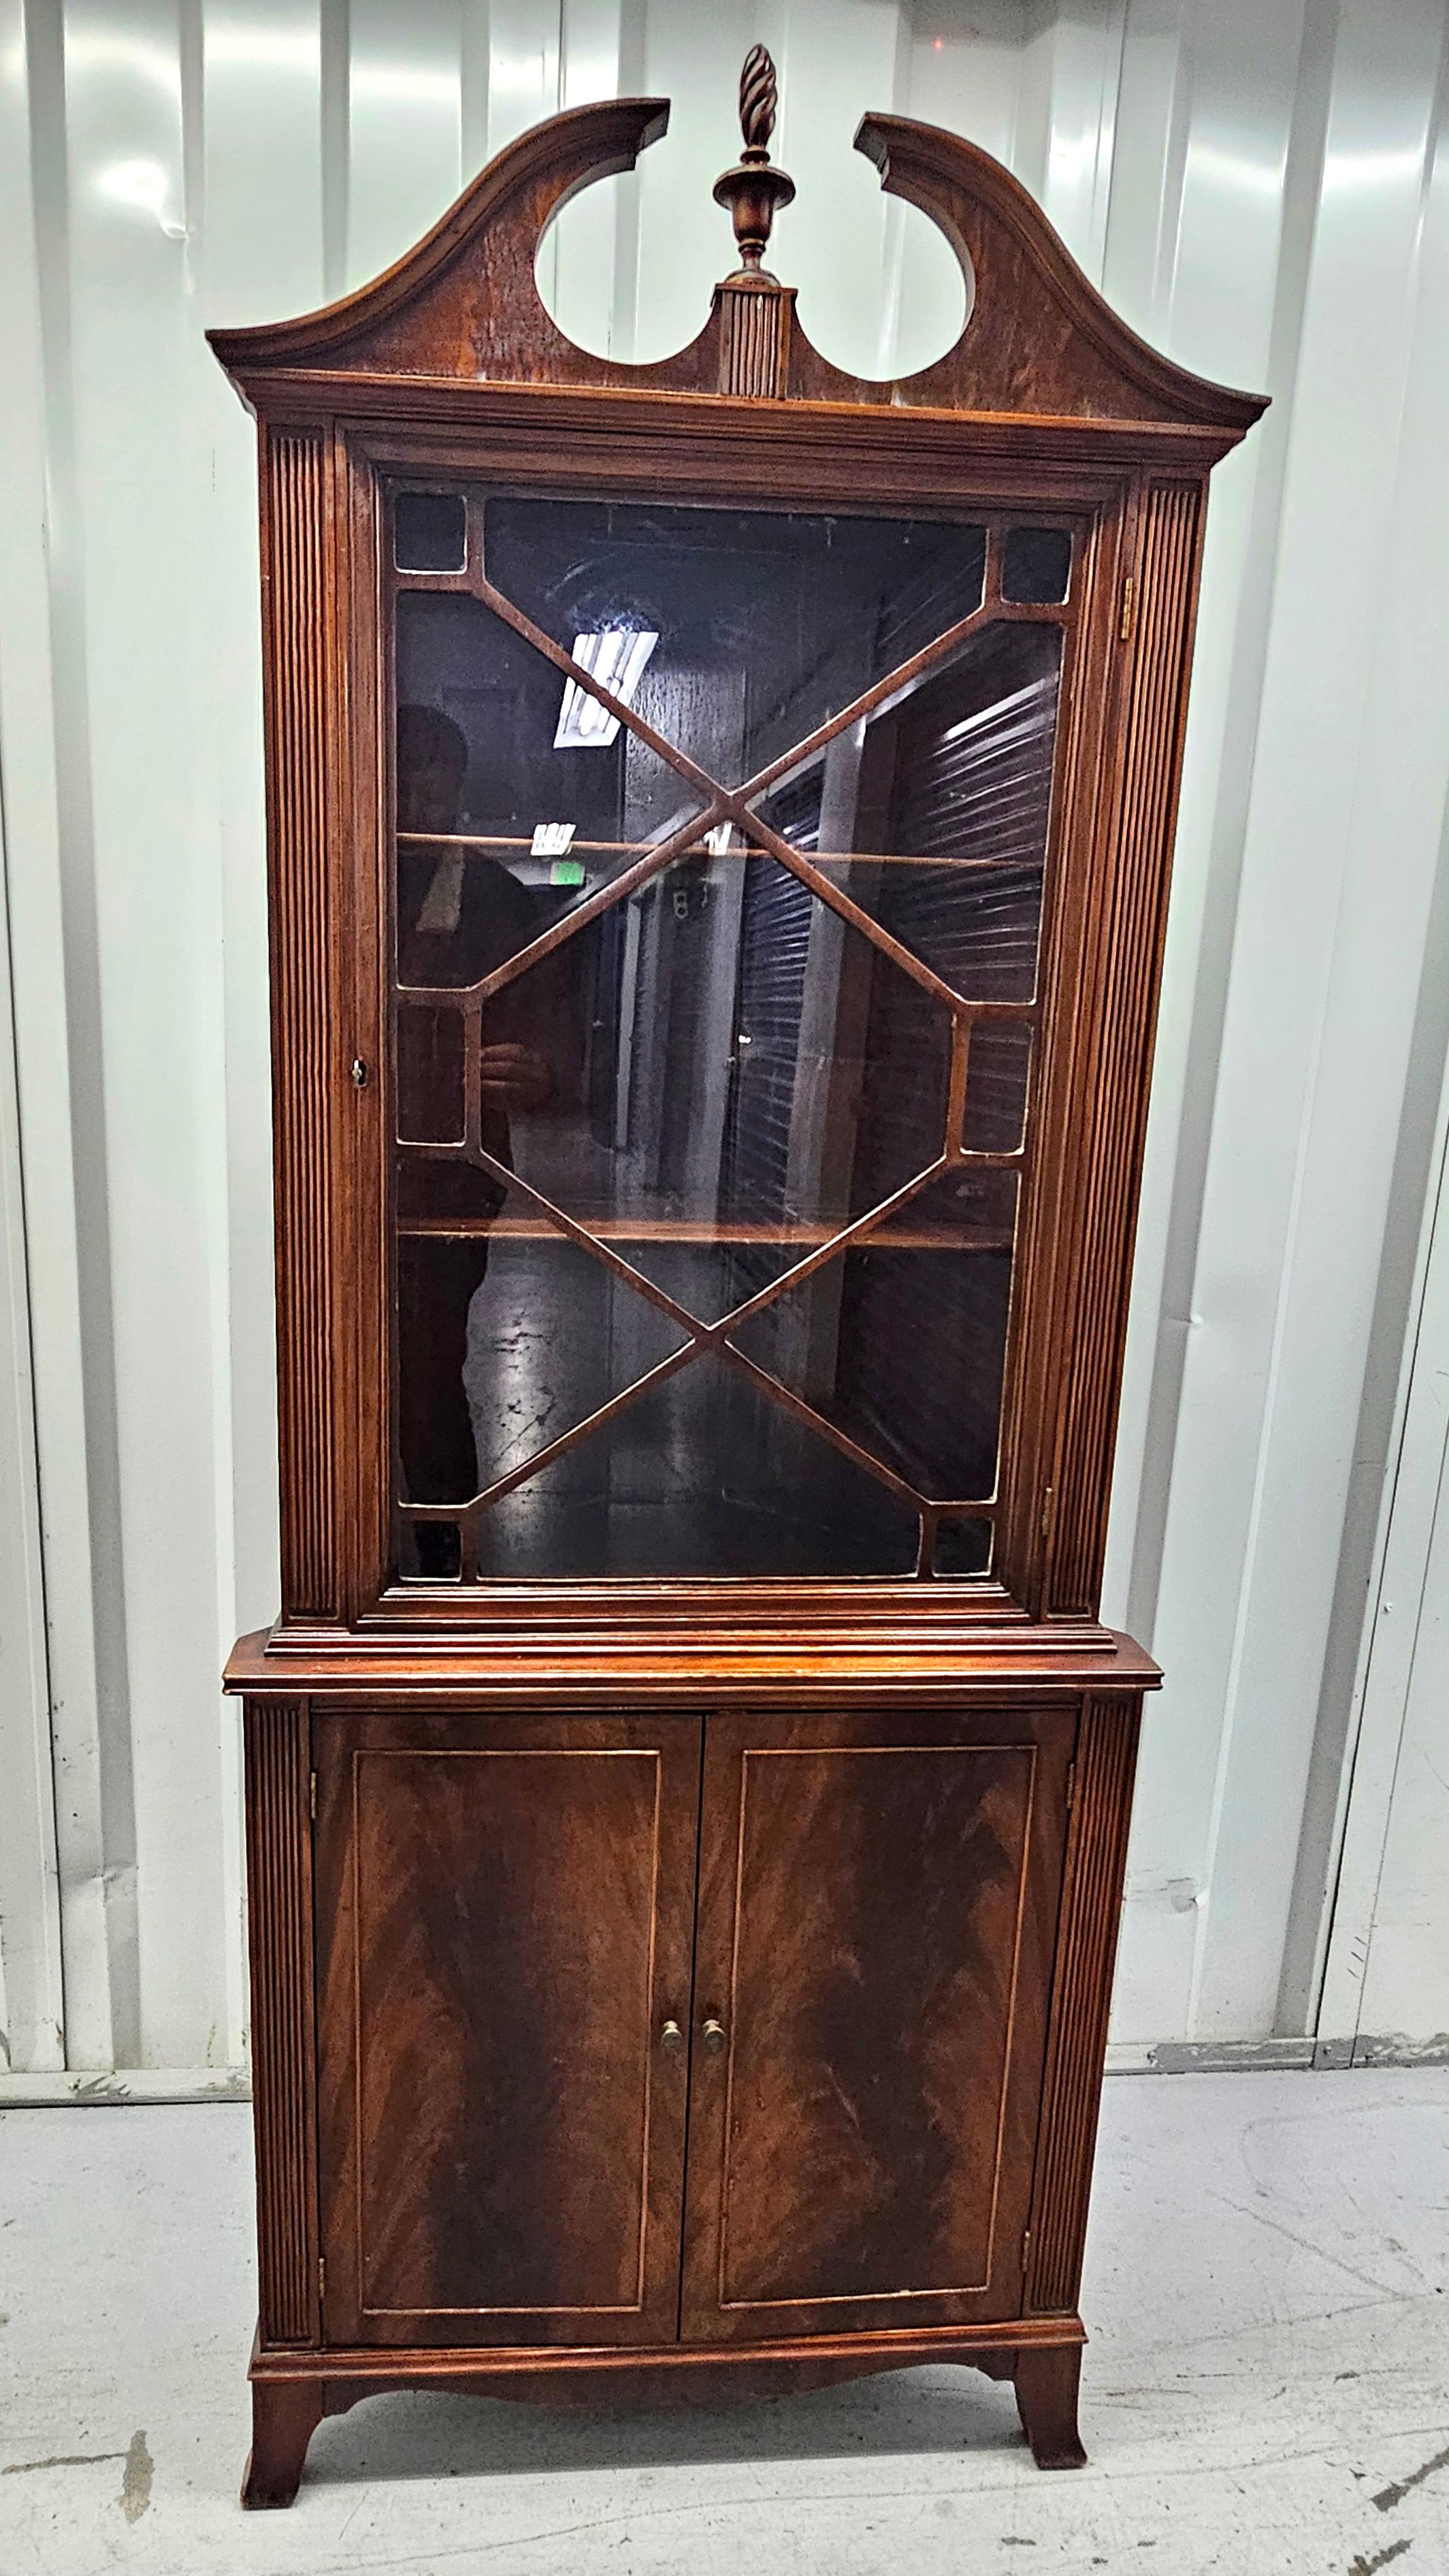 19th Century Swirl Mahogany Georgian Corner Cabinet In Good Condition For Sale In Germantown, MD